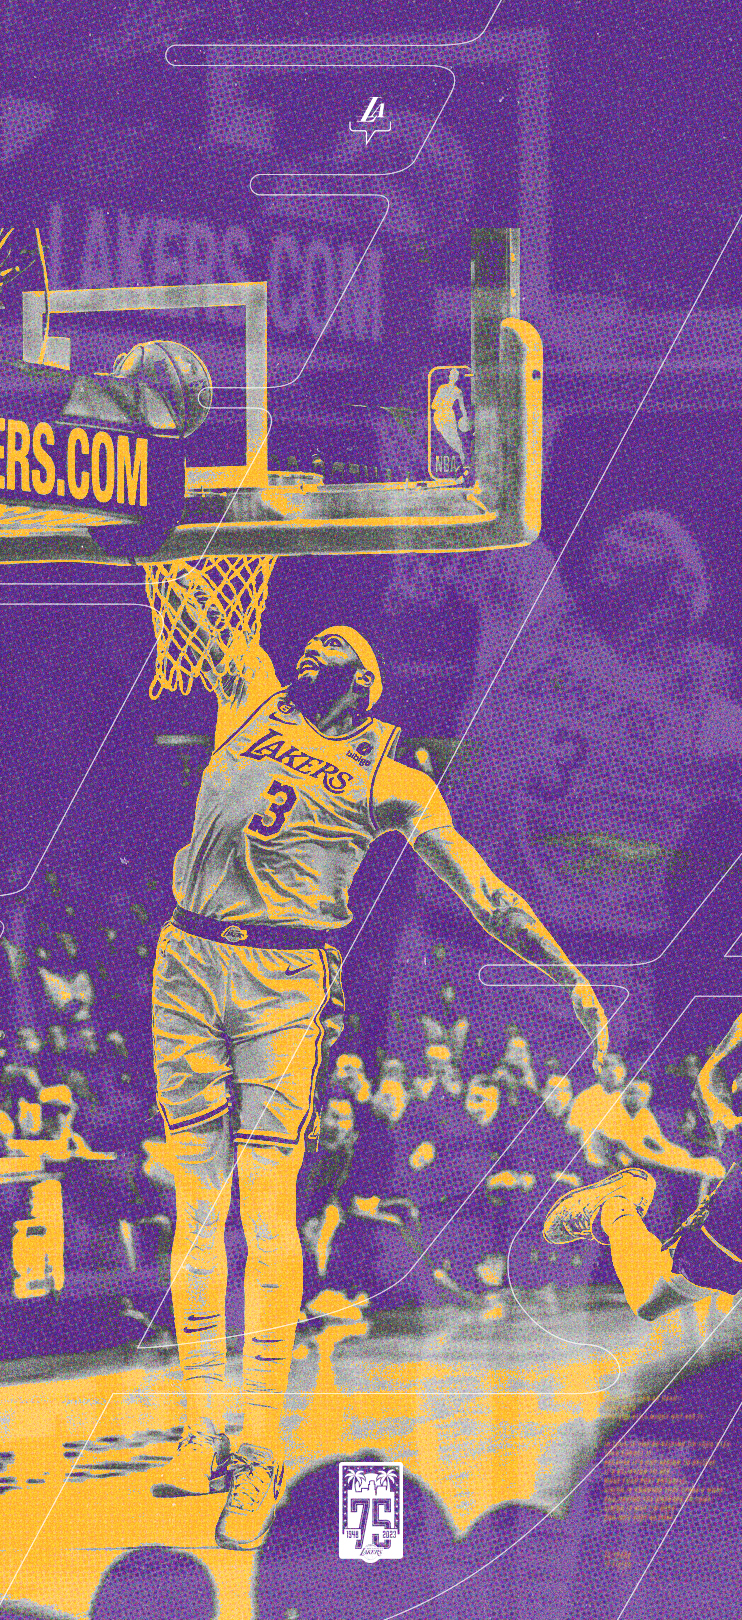 lebron james lakers iPhone Wallpapers Free Download